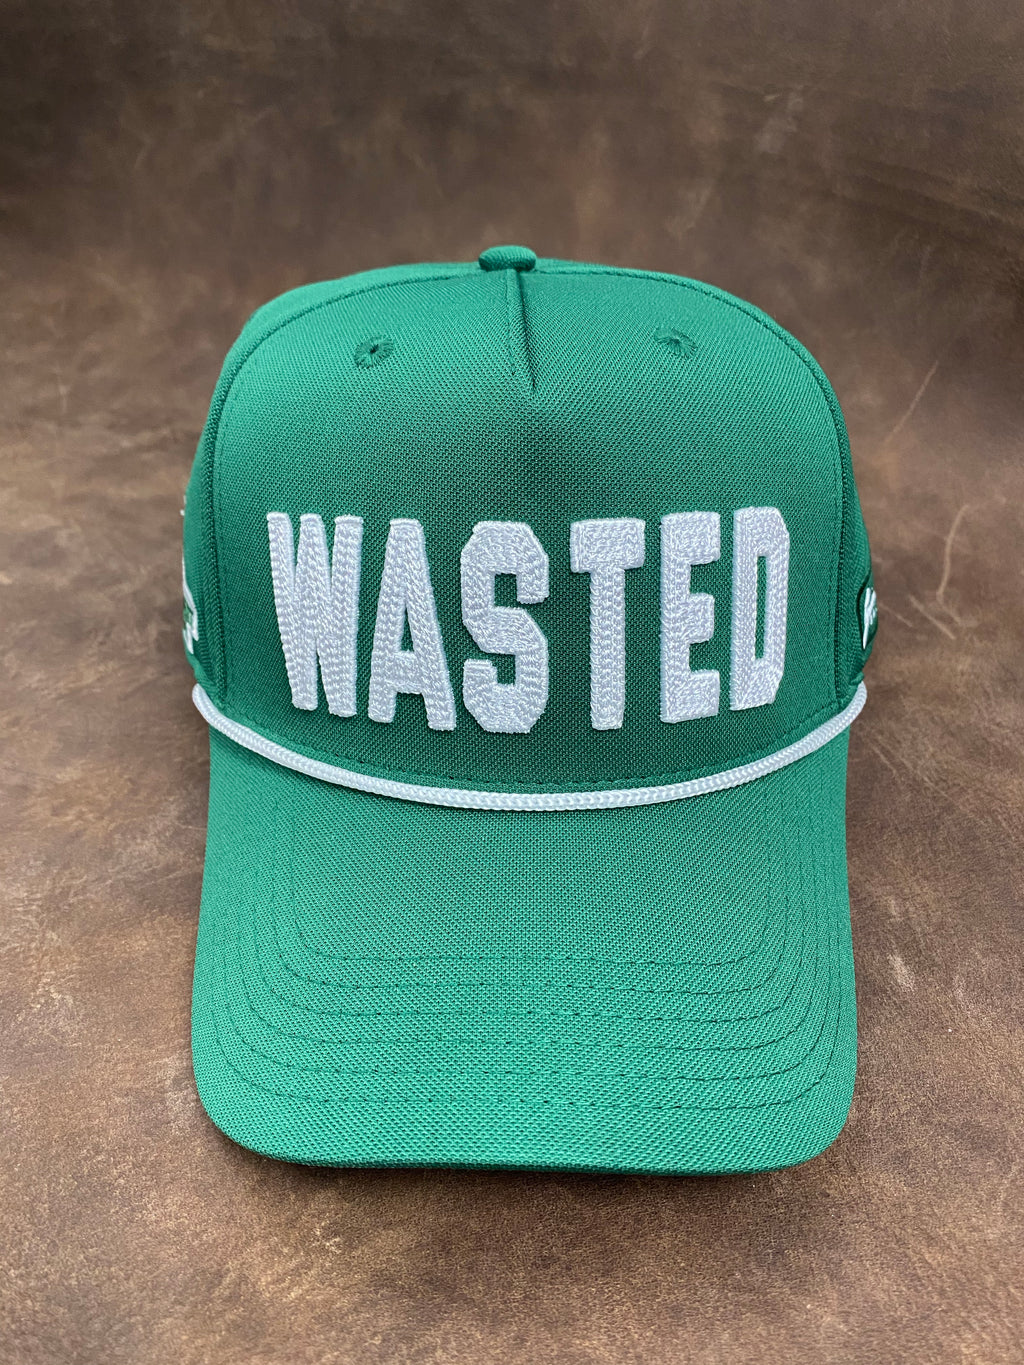 WaStEd Management ROPE Snapback Curved Bill GREEN